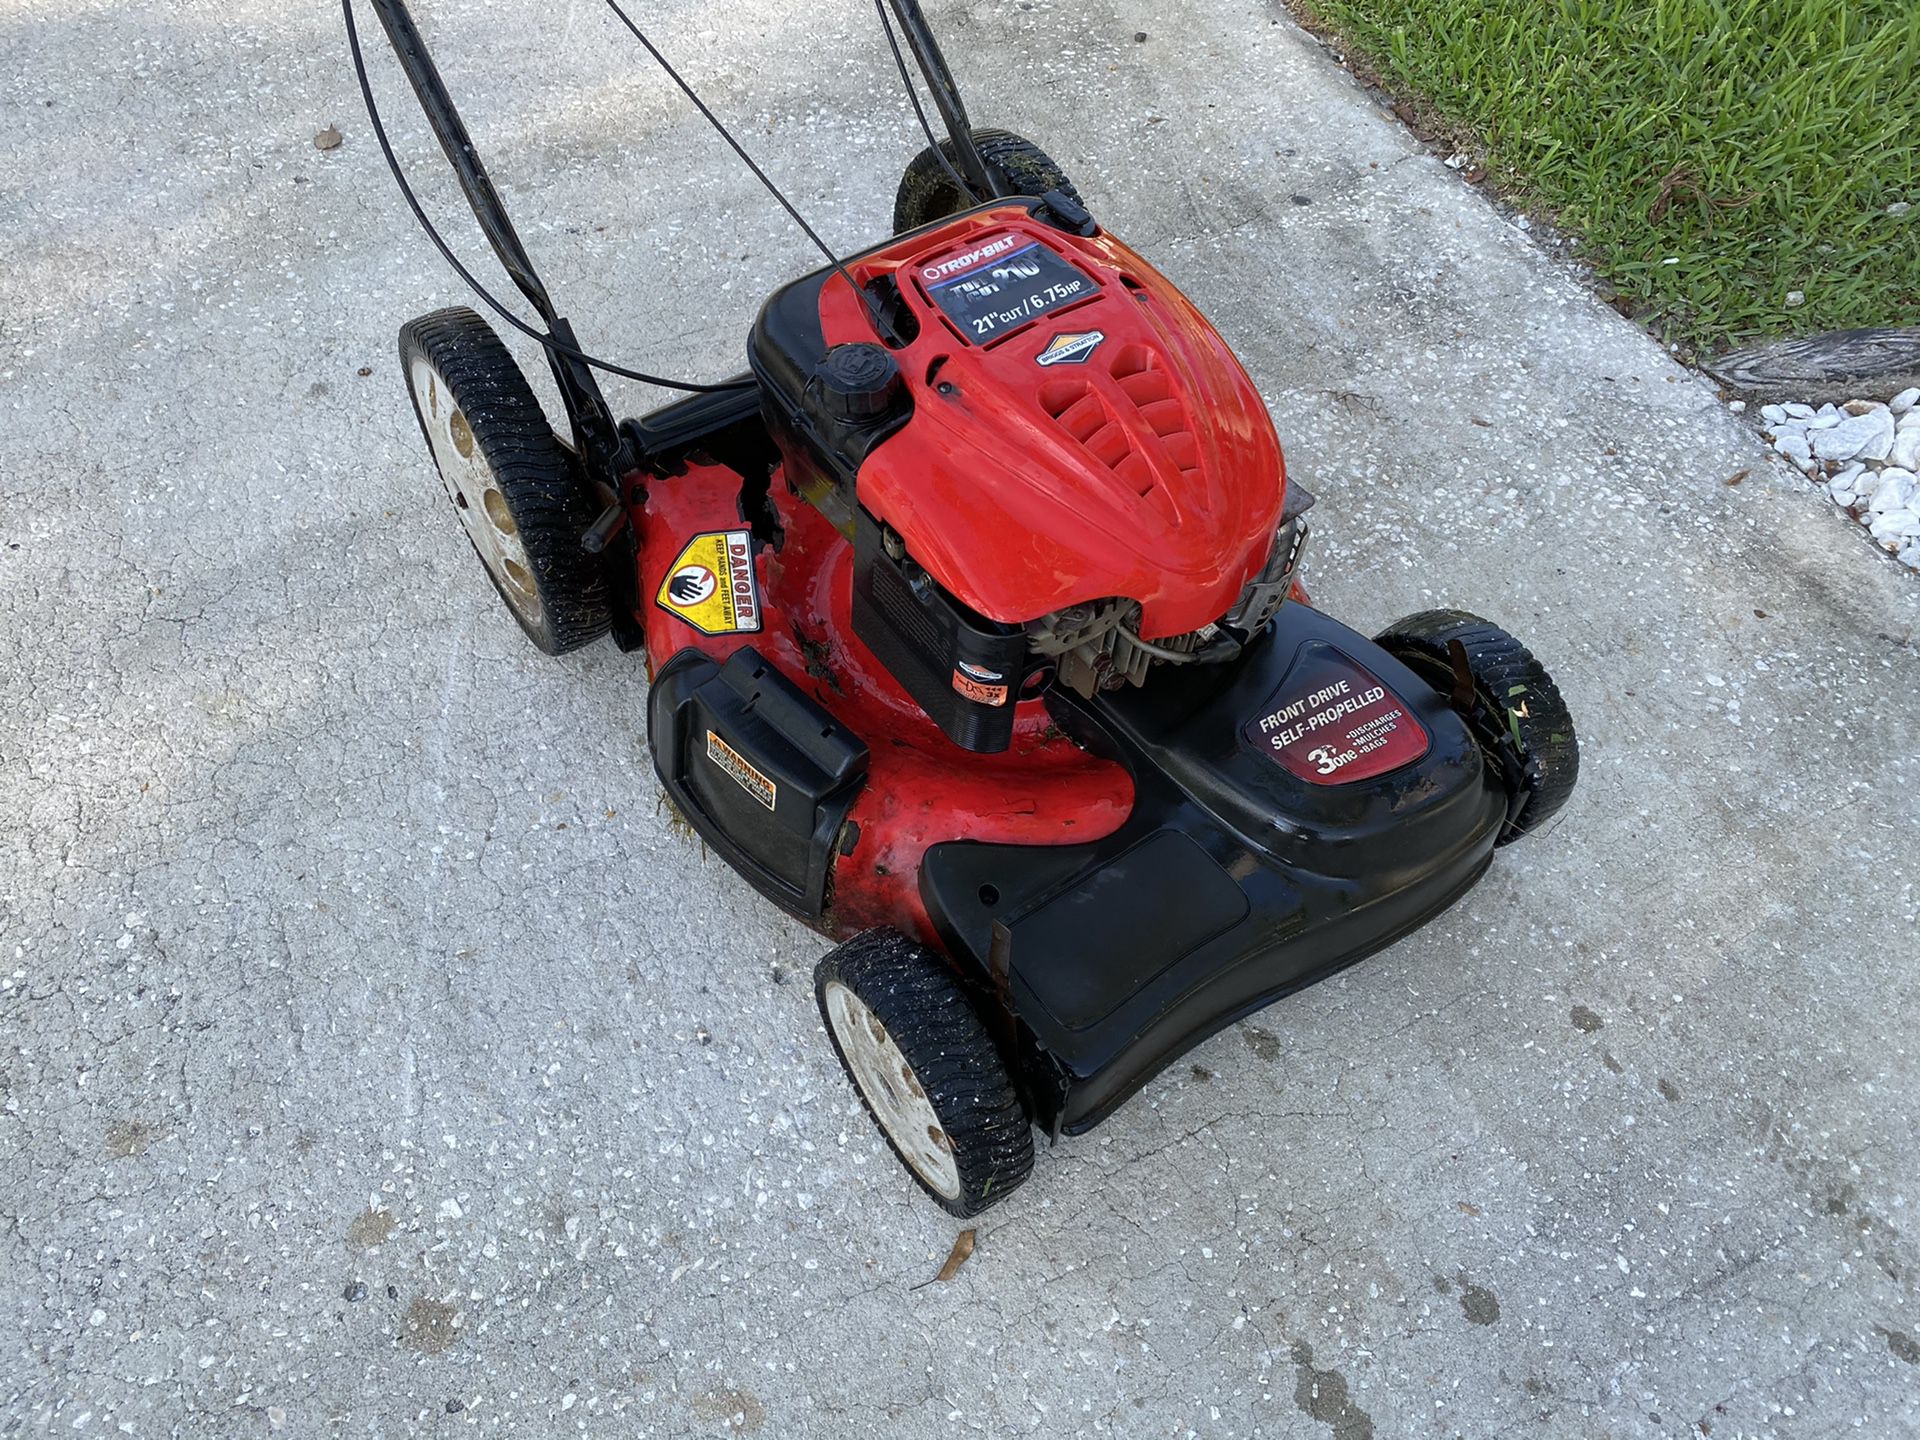 Troy Bilt self propelled lawnmower runs great it’s a little rough on the outside but it works great. Please look at the other items for selling on ou